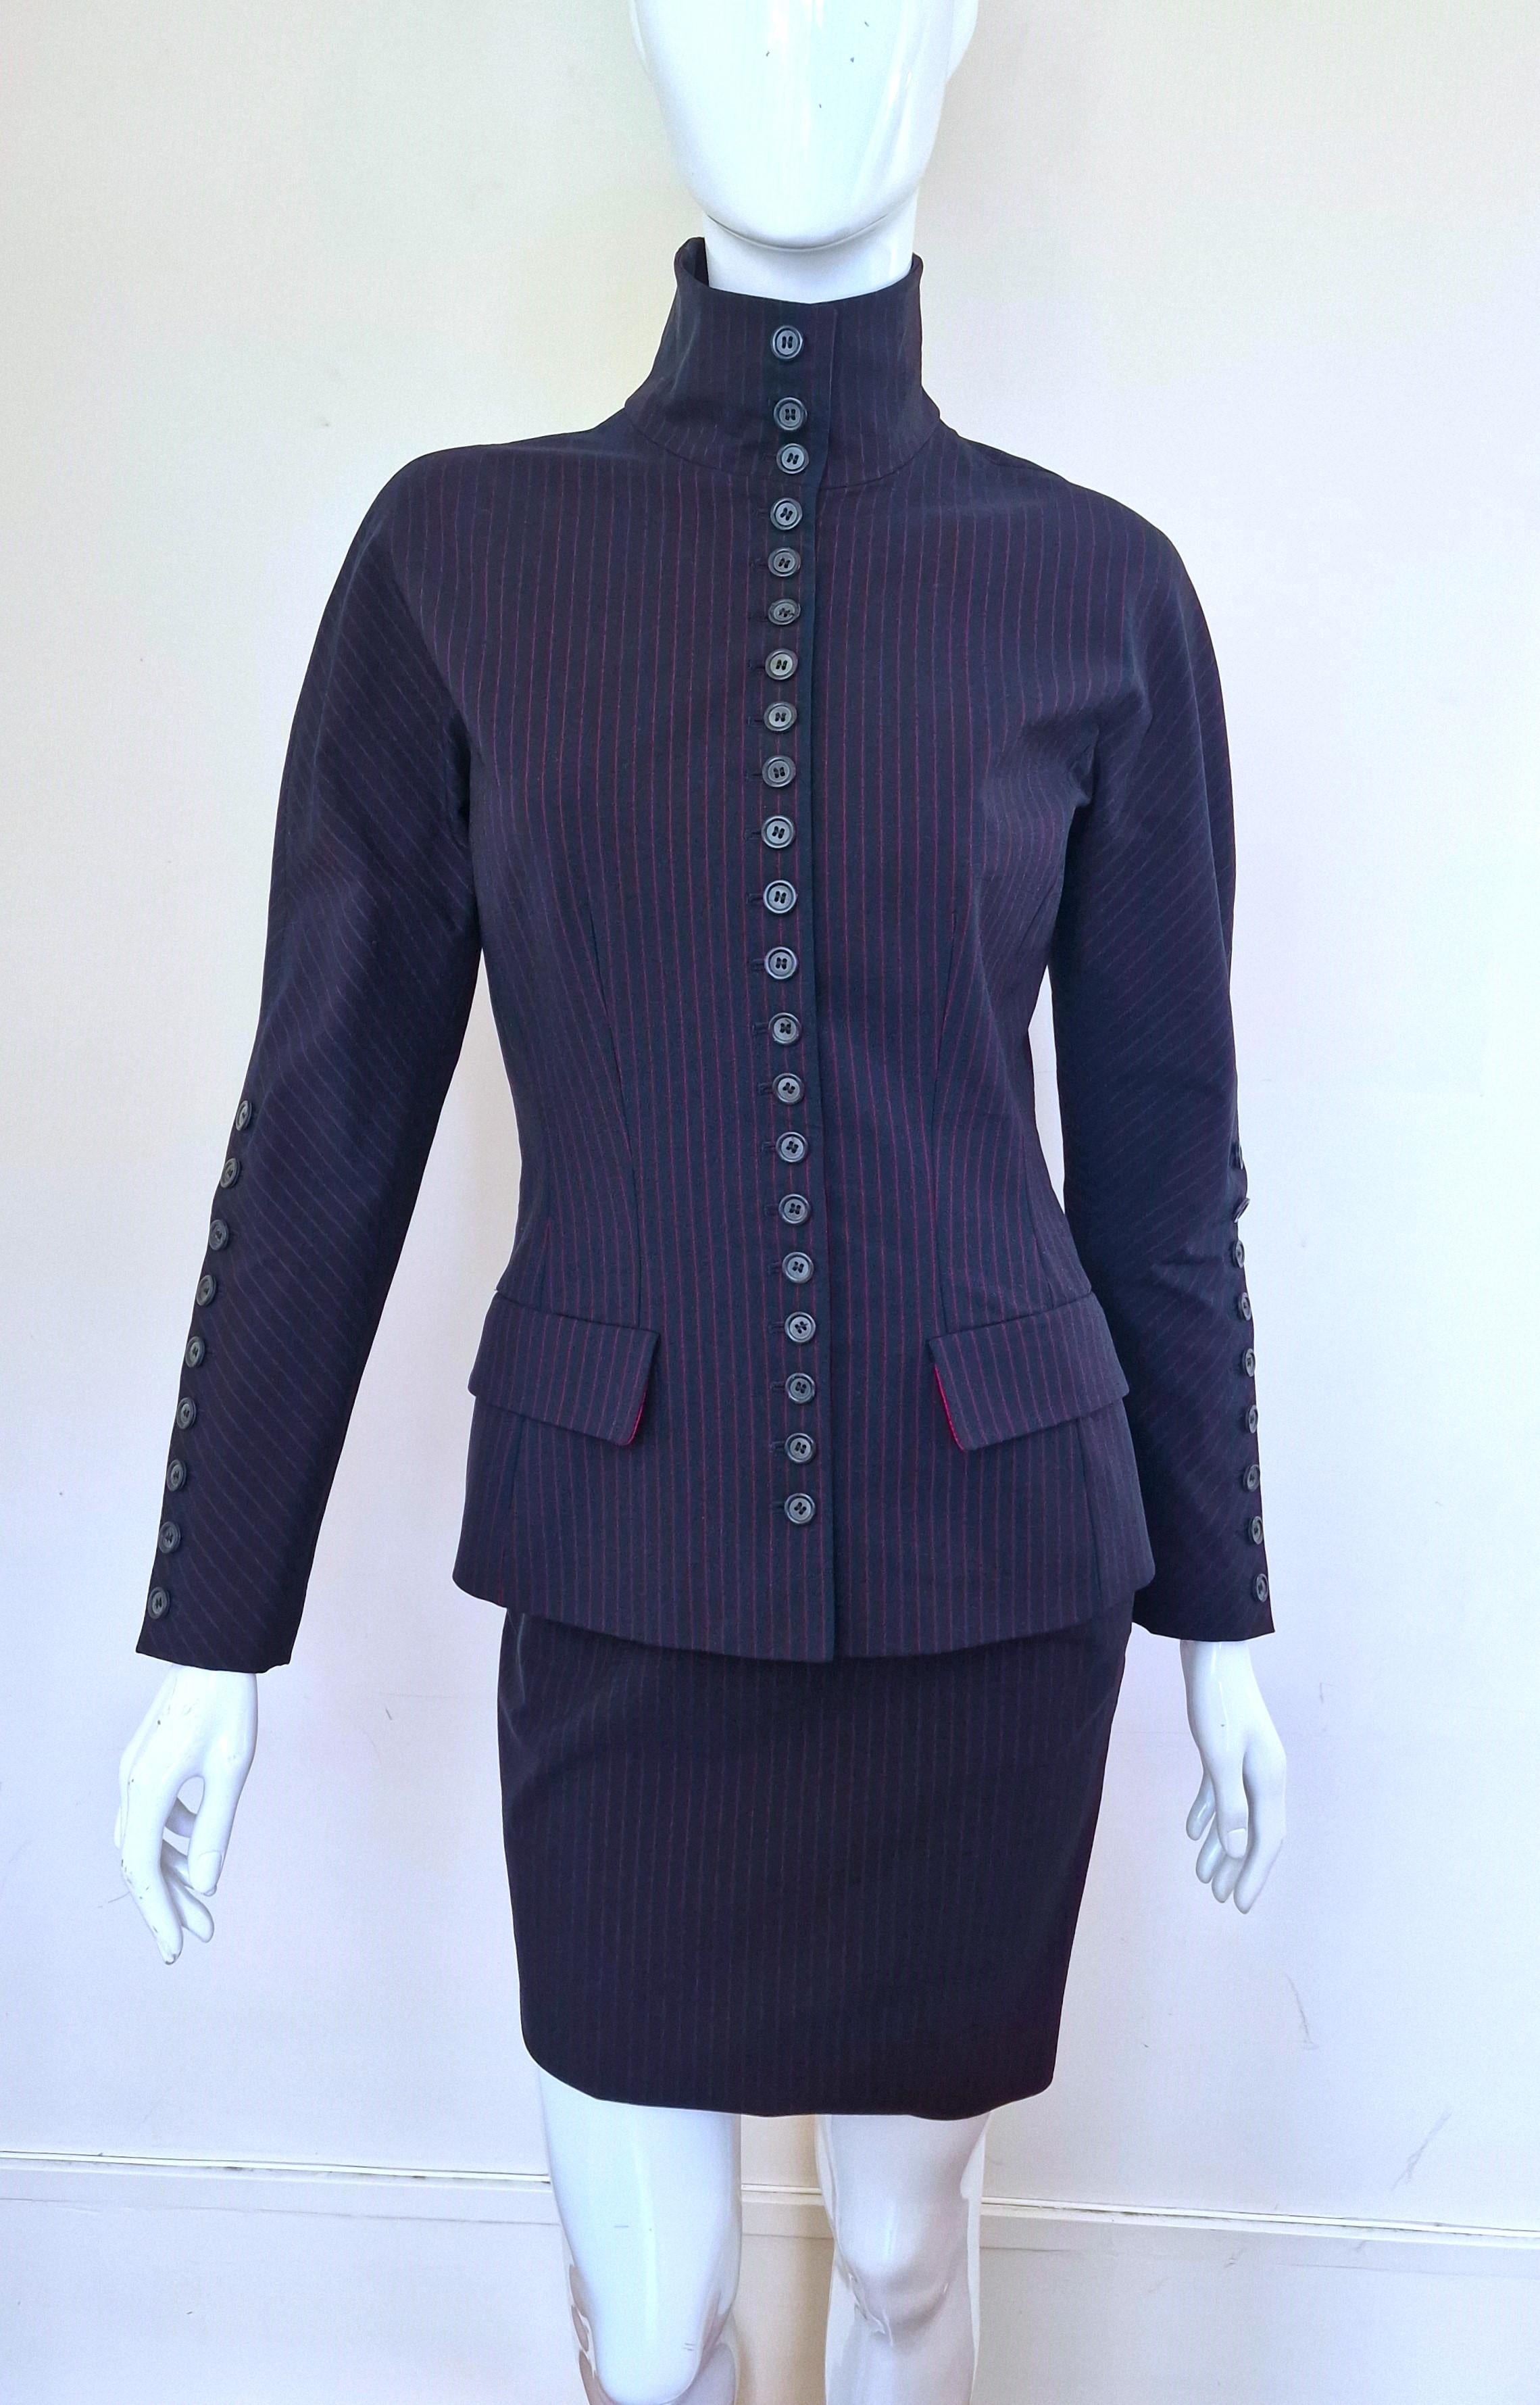 Early Alexander McQueen Joan of Arc Cape 1998 AW98 Runway Collar Dress Suit  For Sale 6